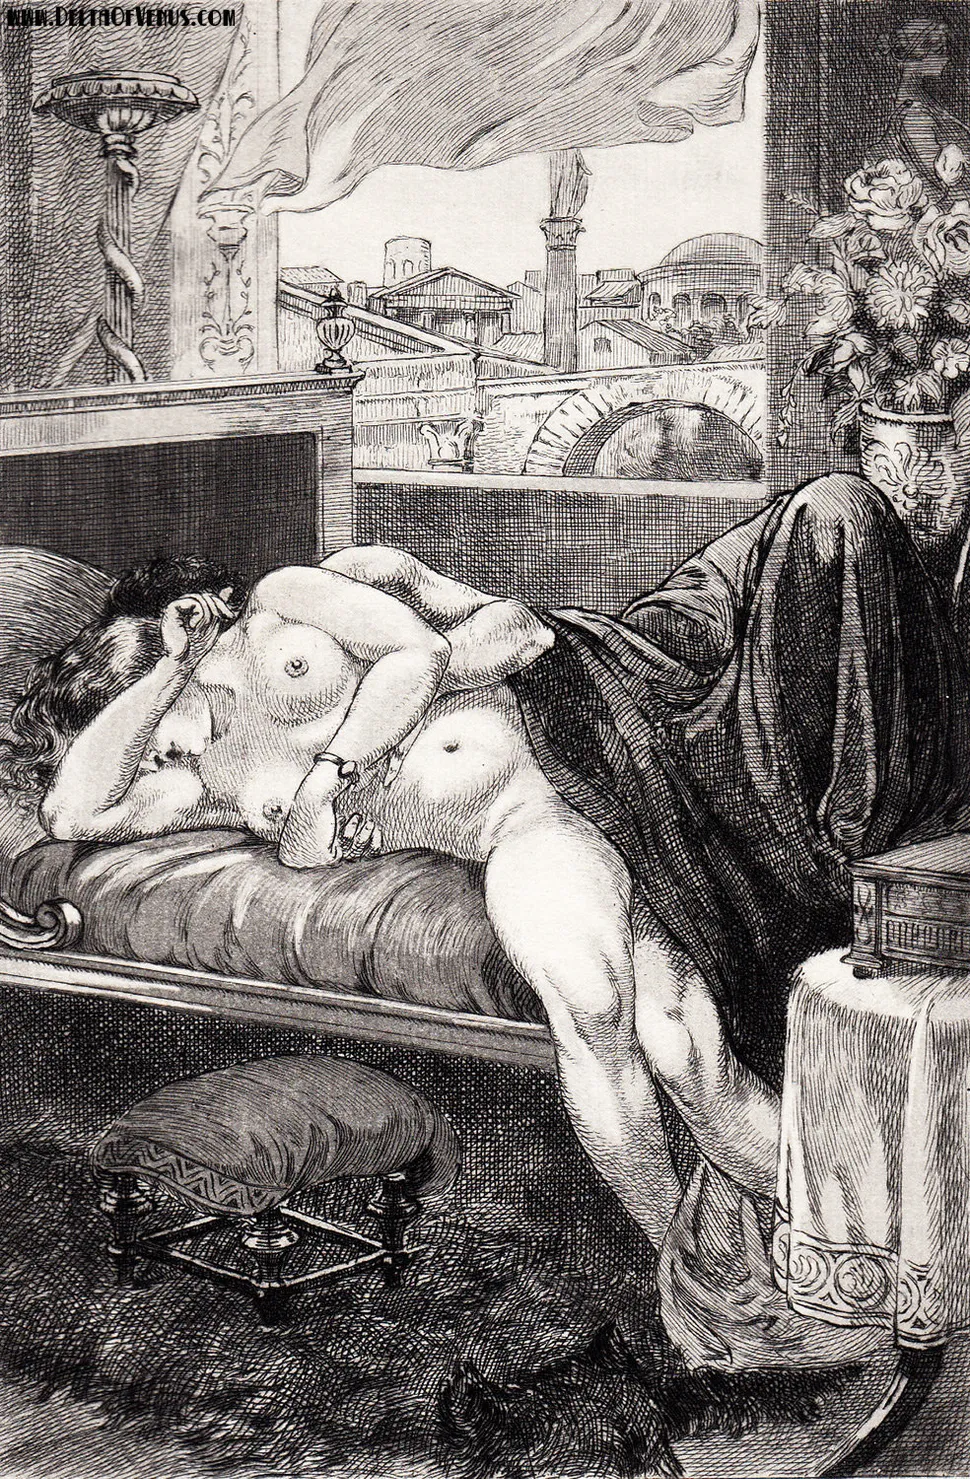 French Antique Sex Art Drawings - Dive Into The Fantasies Of An Obscure 19th Century Erotic Illustrator  (NSFW) | HuffPost Entertainment